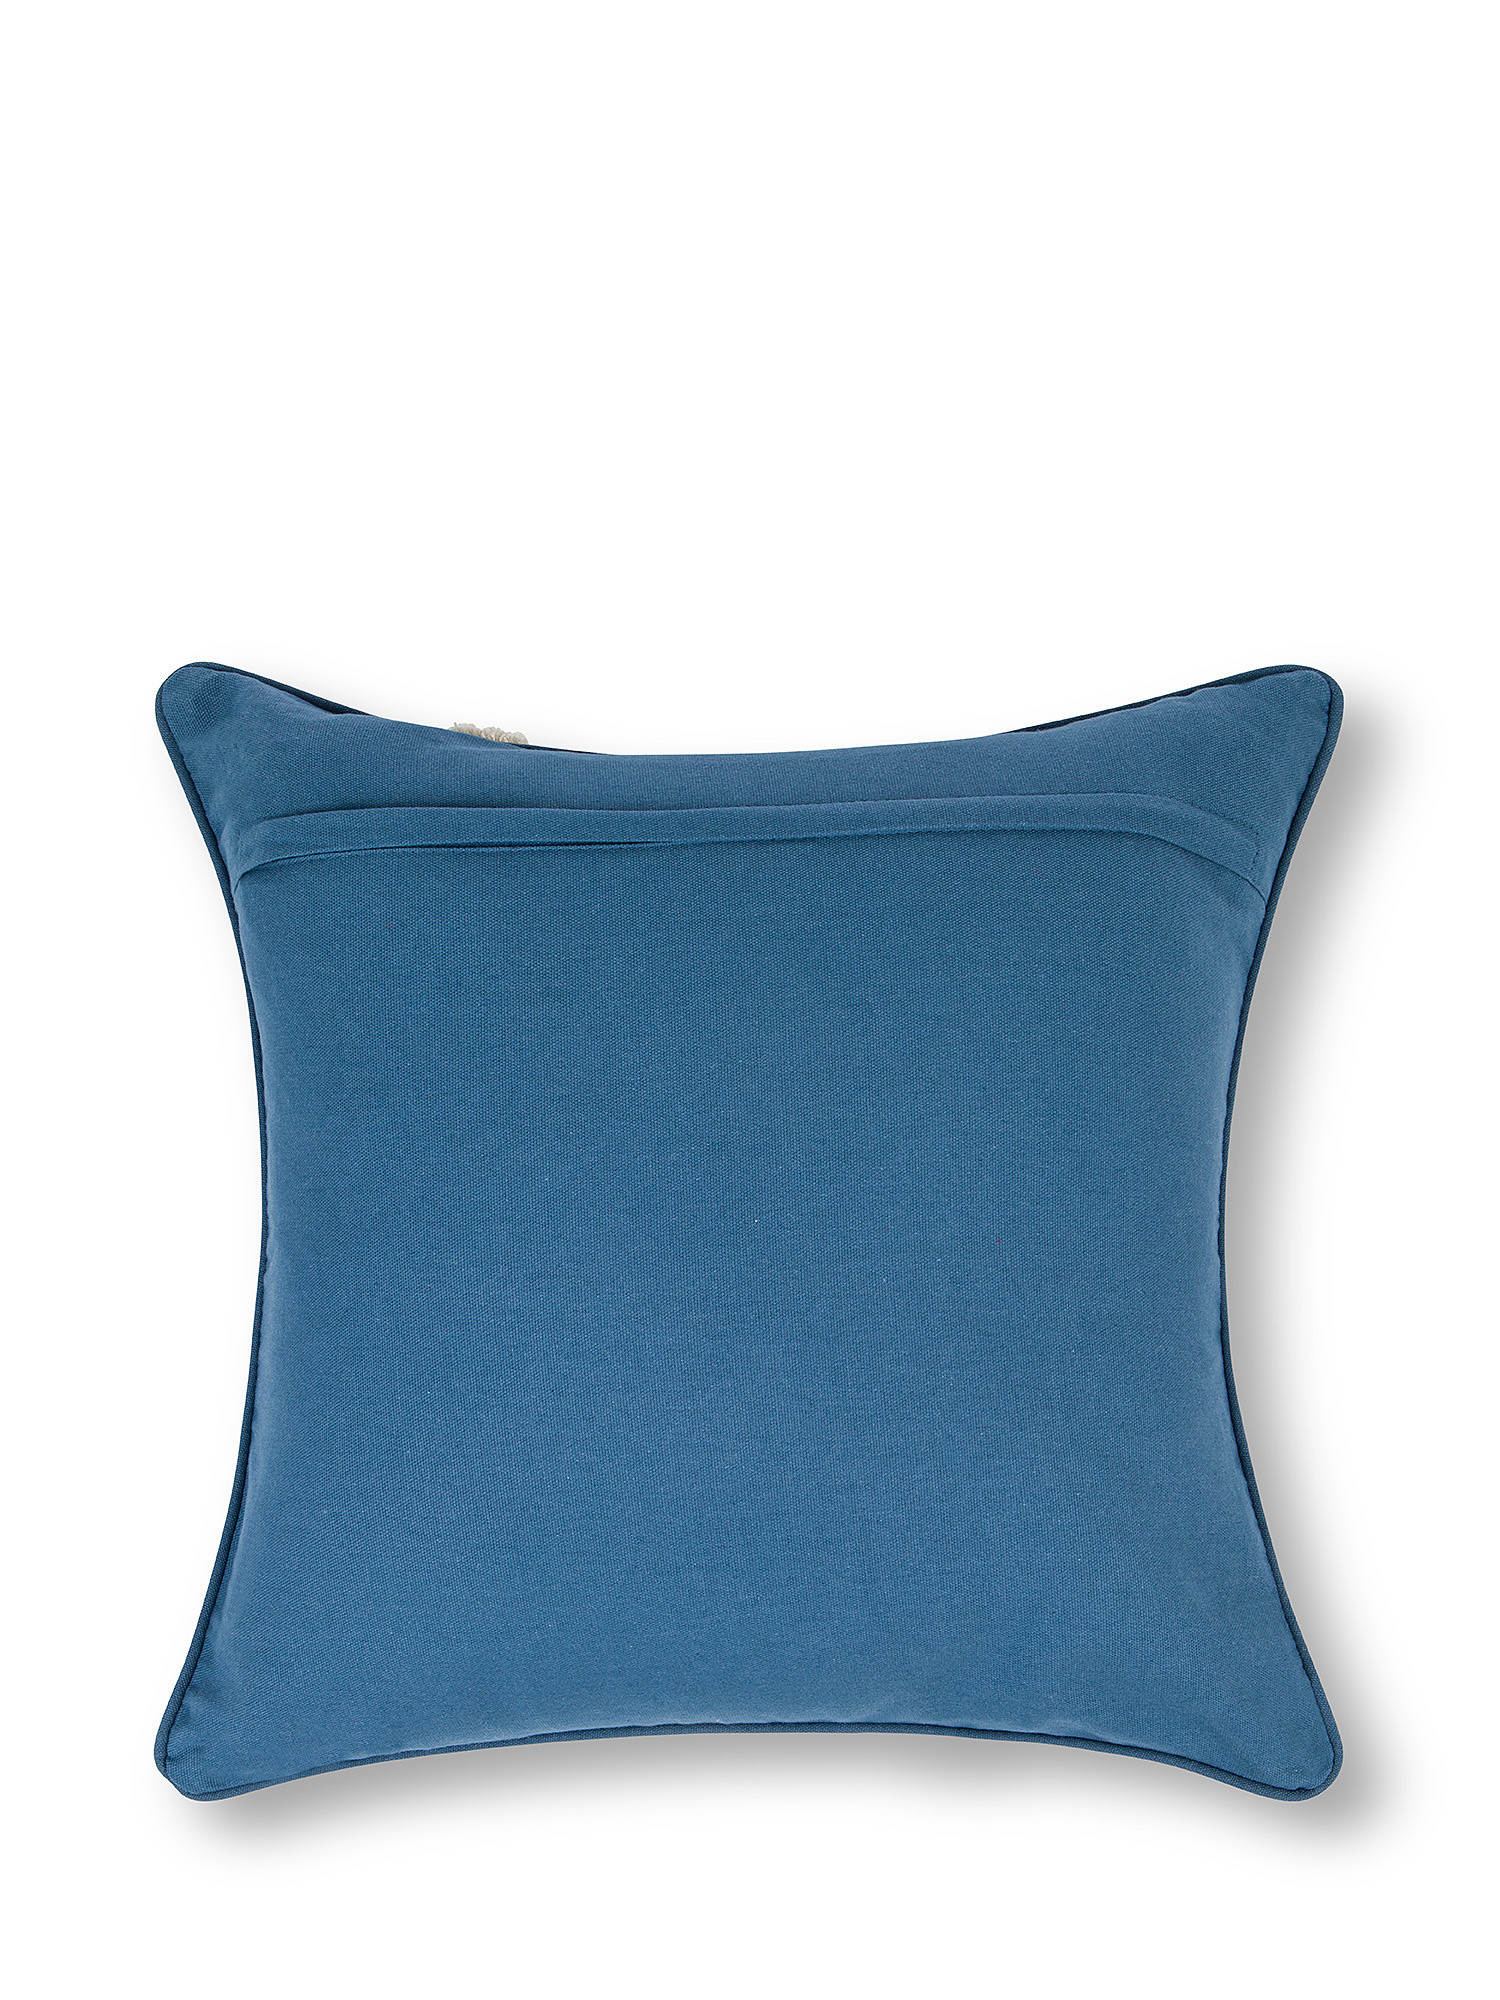 45x45 cm cushion with applications and embroidery, Blue, large image number 1